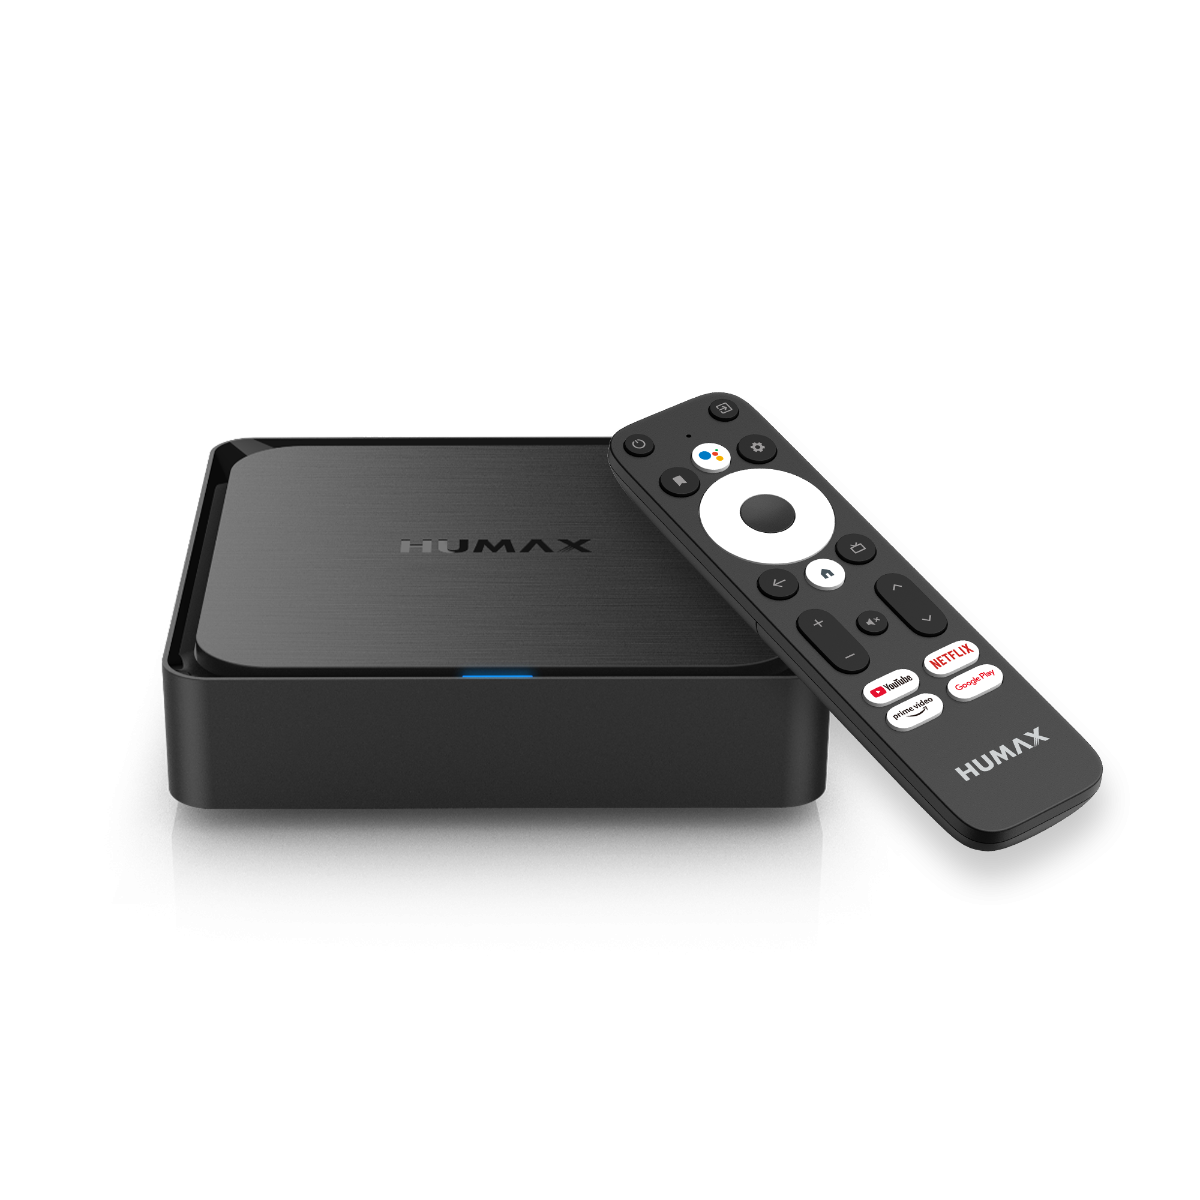 Android (TV, Box, Fire TV Stick)